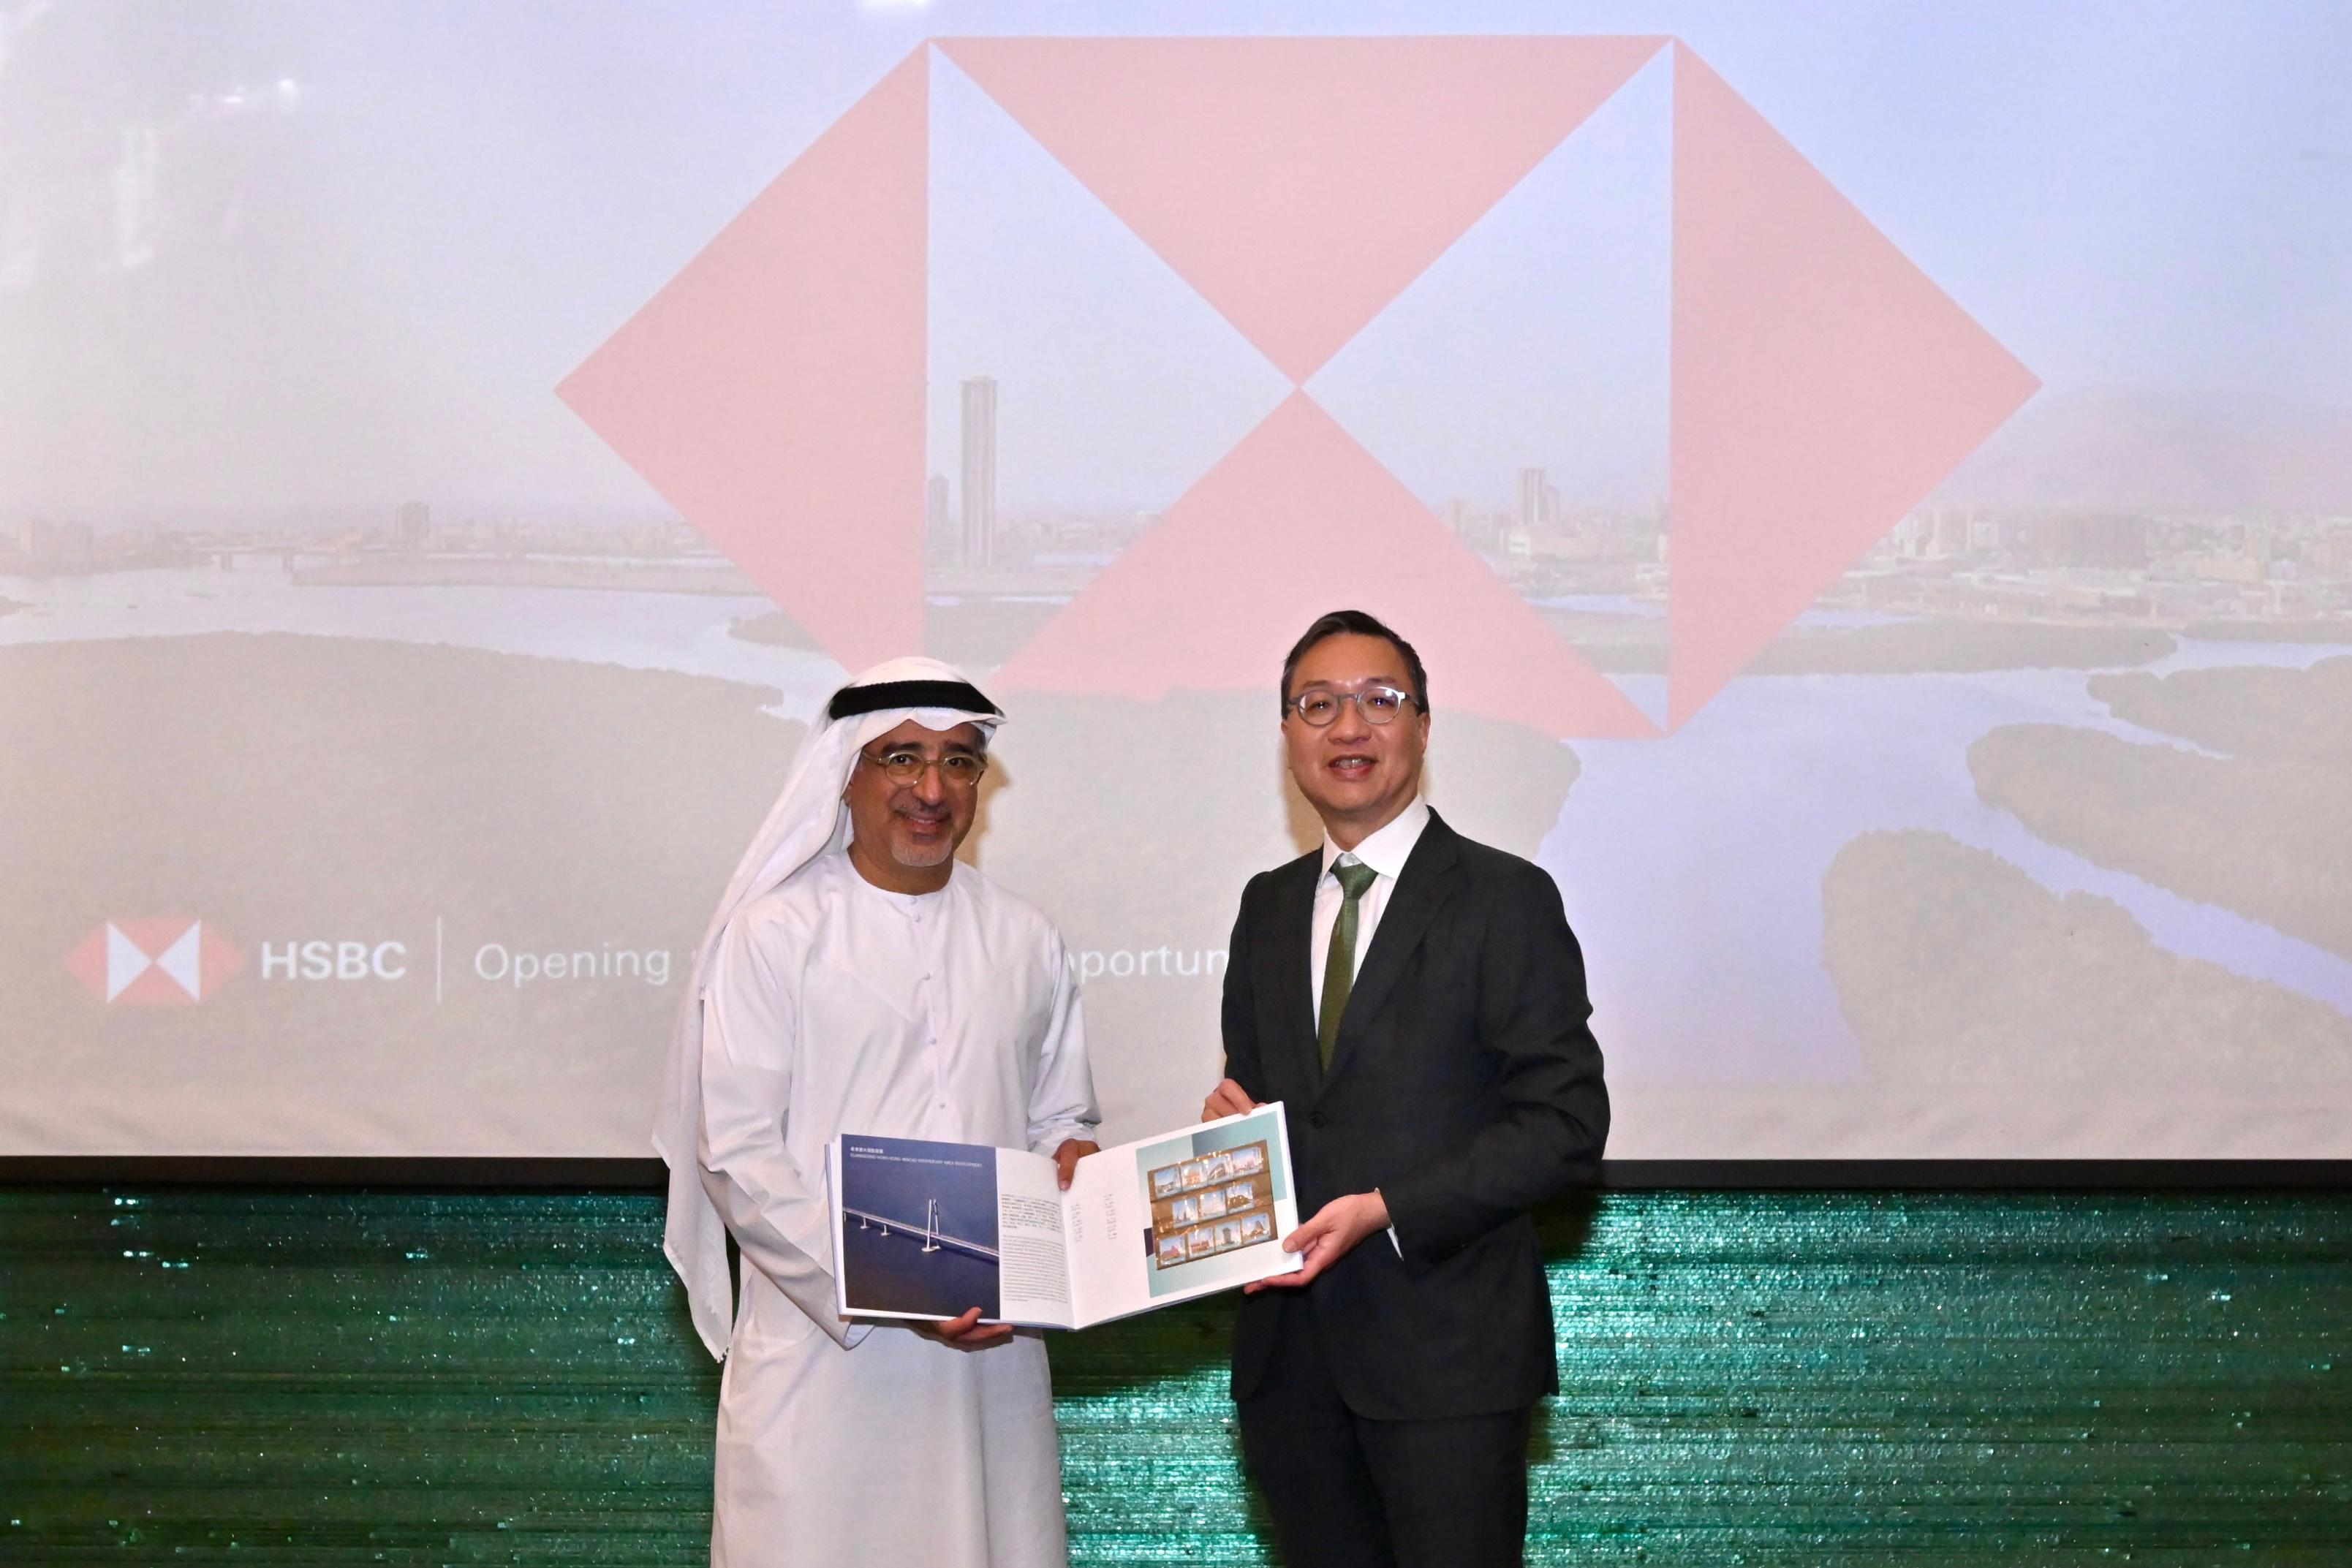 The Secretary for Justice, Mr Paul Lam, SC, started his visit programme to Abu Dhabi, the United Arab Emirates, today (May 21, Abu Dhabi time) with his about 30-strong delegation, comprising representatives from the Law Society of Hong Kong, the Hong Kong Bar Association, the Hong Kong Exchanges and Clearing Limited, Invest Hong Kong and related sectors. Photo shows Mr Lam (right) presenting a souvenir to the Chairman of the Board of HSBC Bank Middle East, Mr Abdulfattah Sharaf (left).

